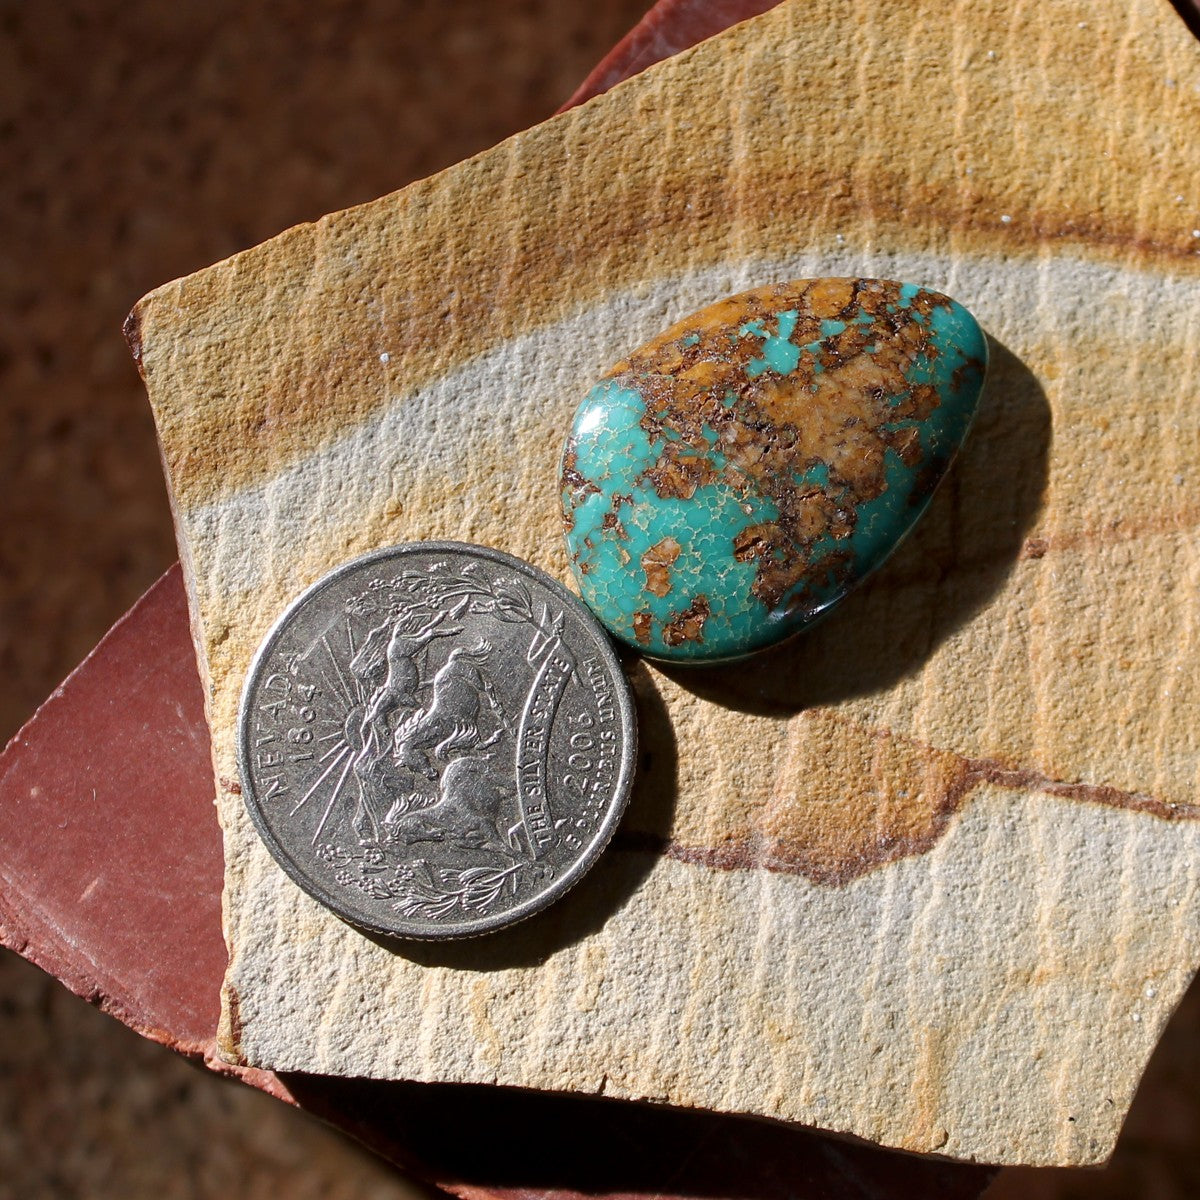 26.3 dark blue Stone Mountain Turquoise cabochon with red matrix